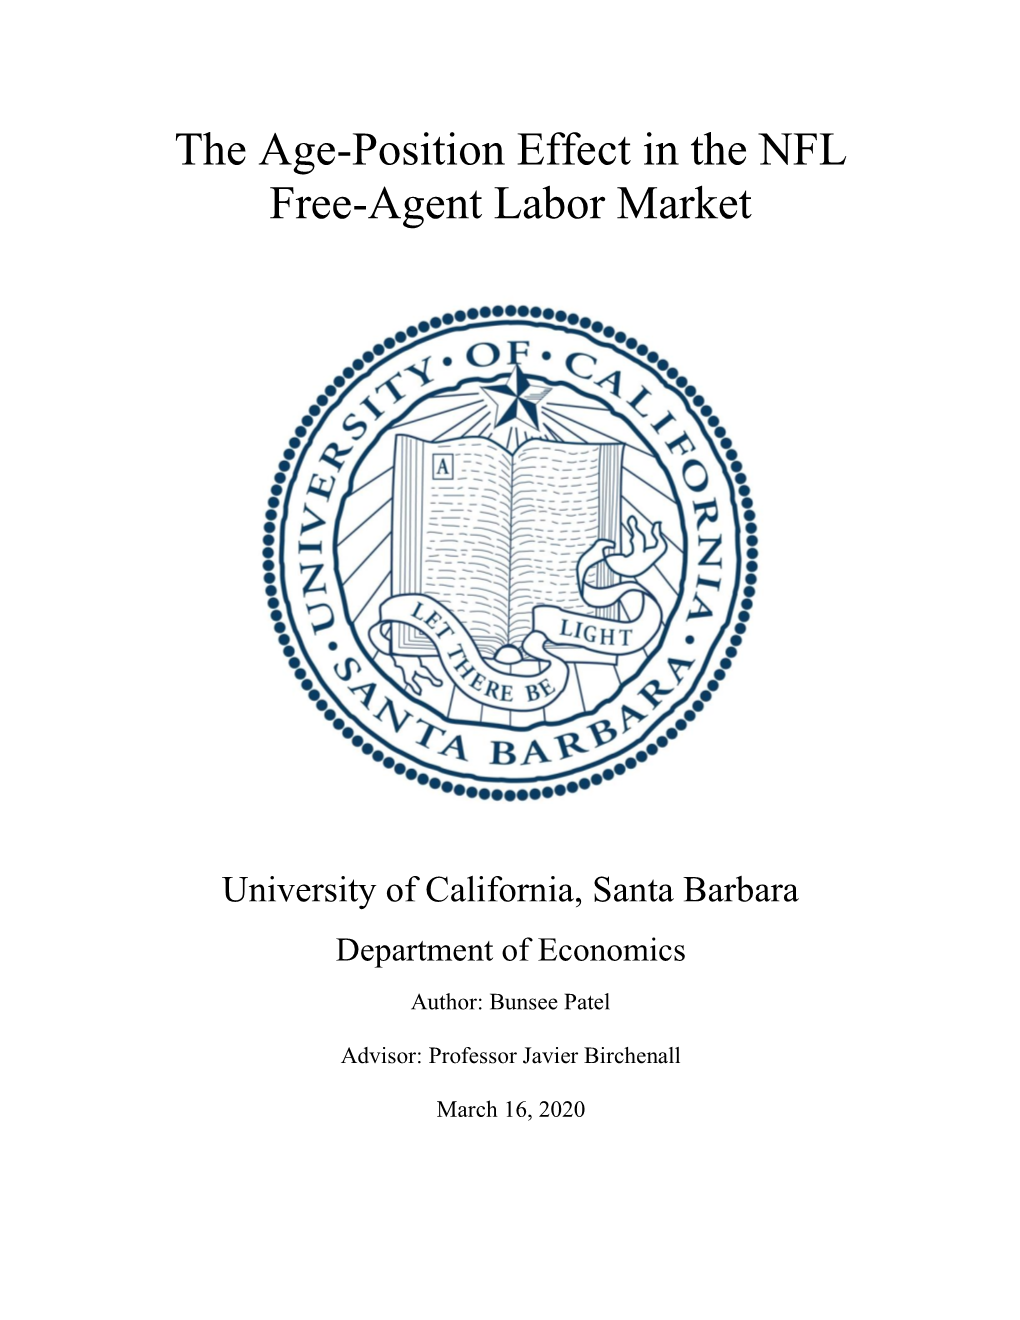 The Age-Position Effect in the NFL Free-Agent Labor Market